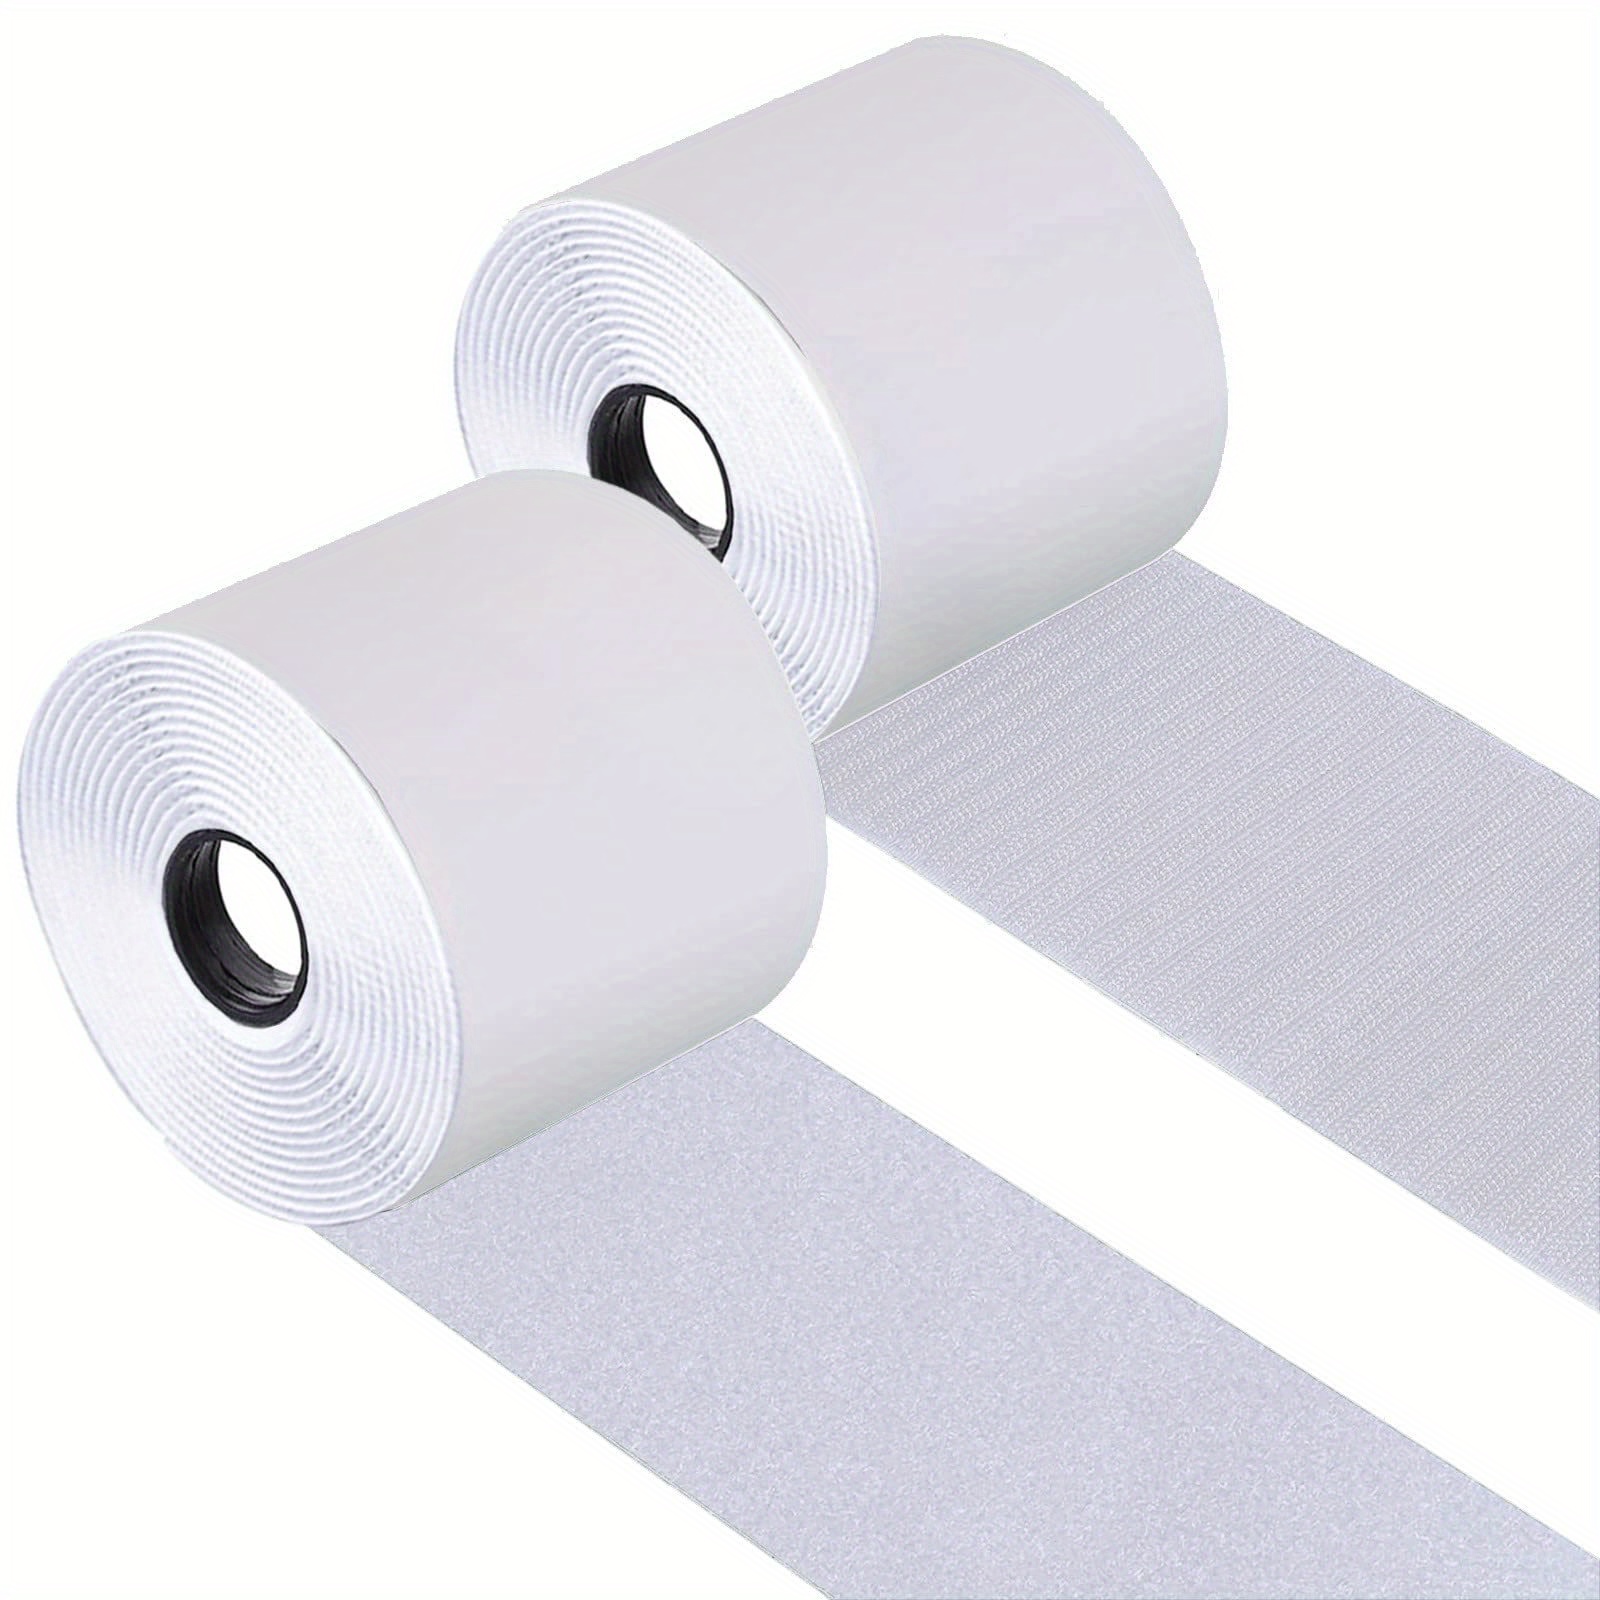  Non Slip Cushion Pad, Rolled Hook Loop Tape with